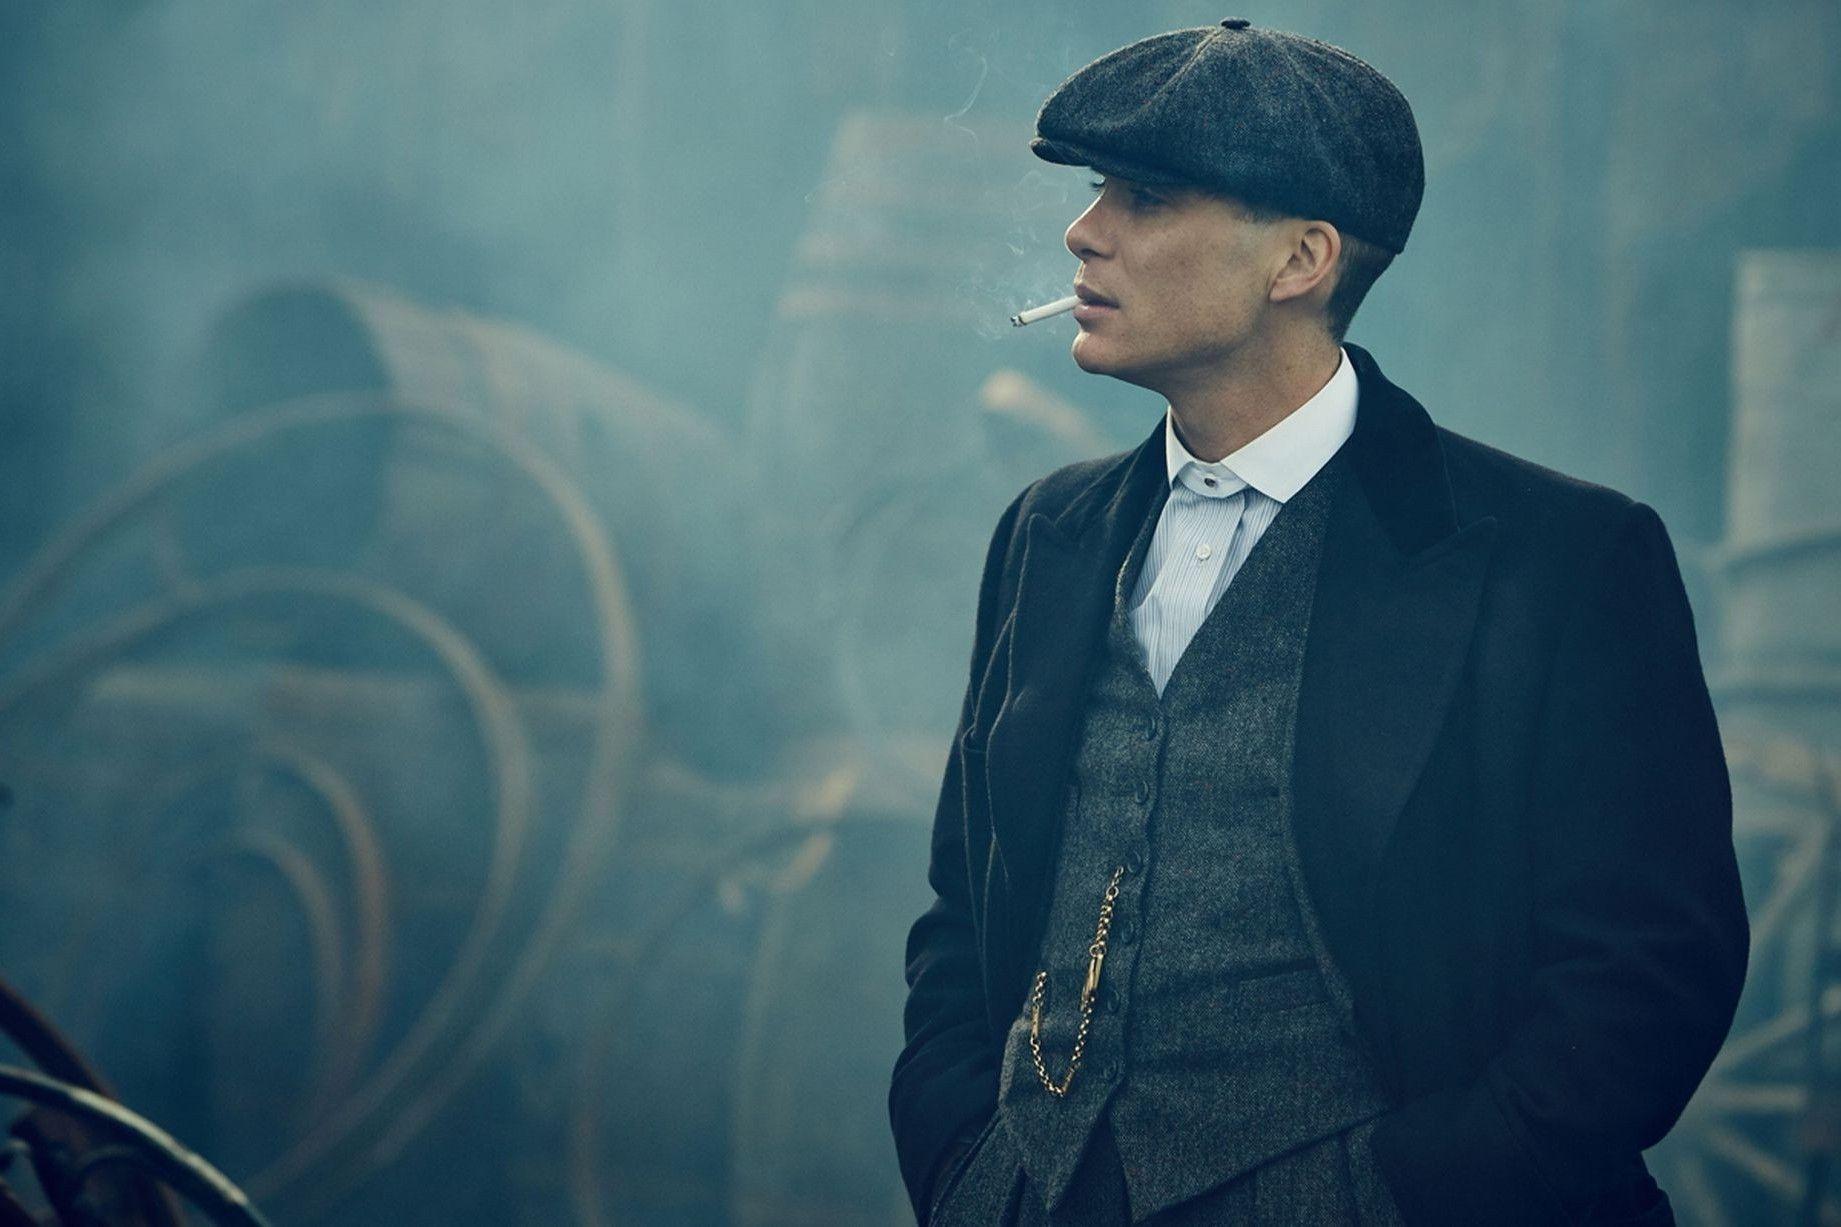 Peaky Blinders Wallpapers 2K | Desk 4K and Mobile Backgrounds